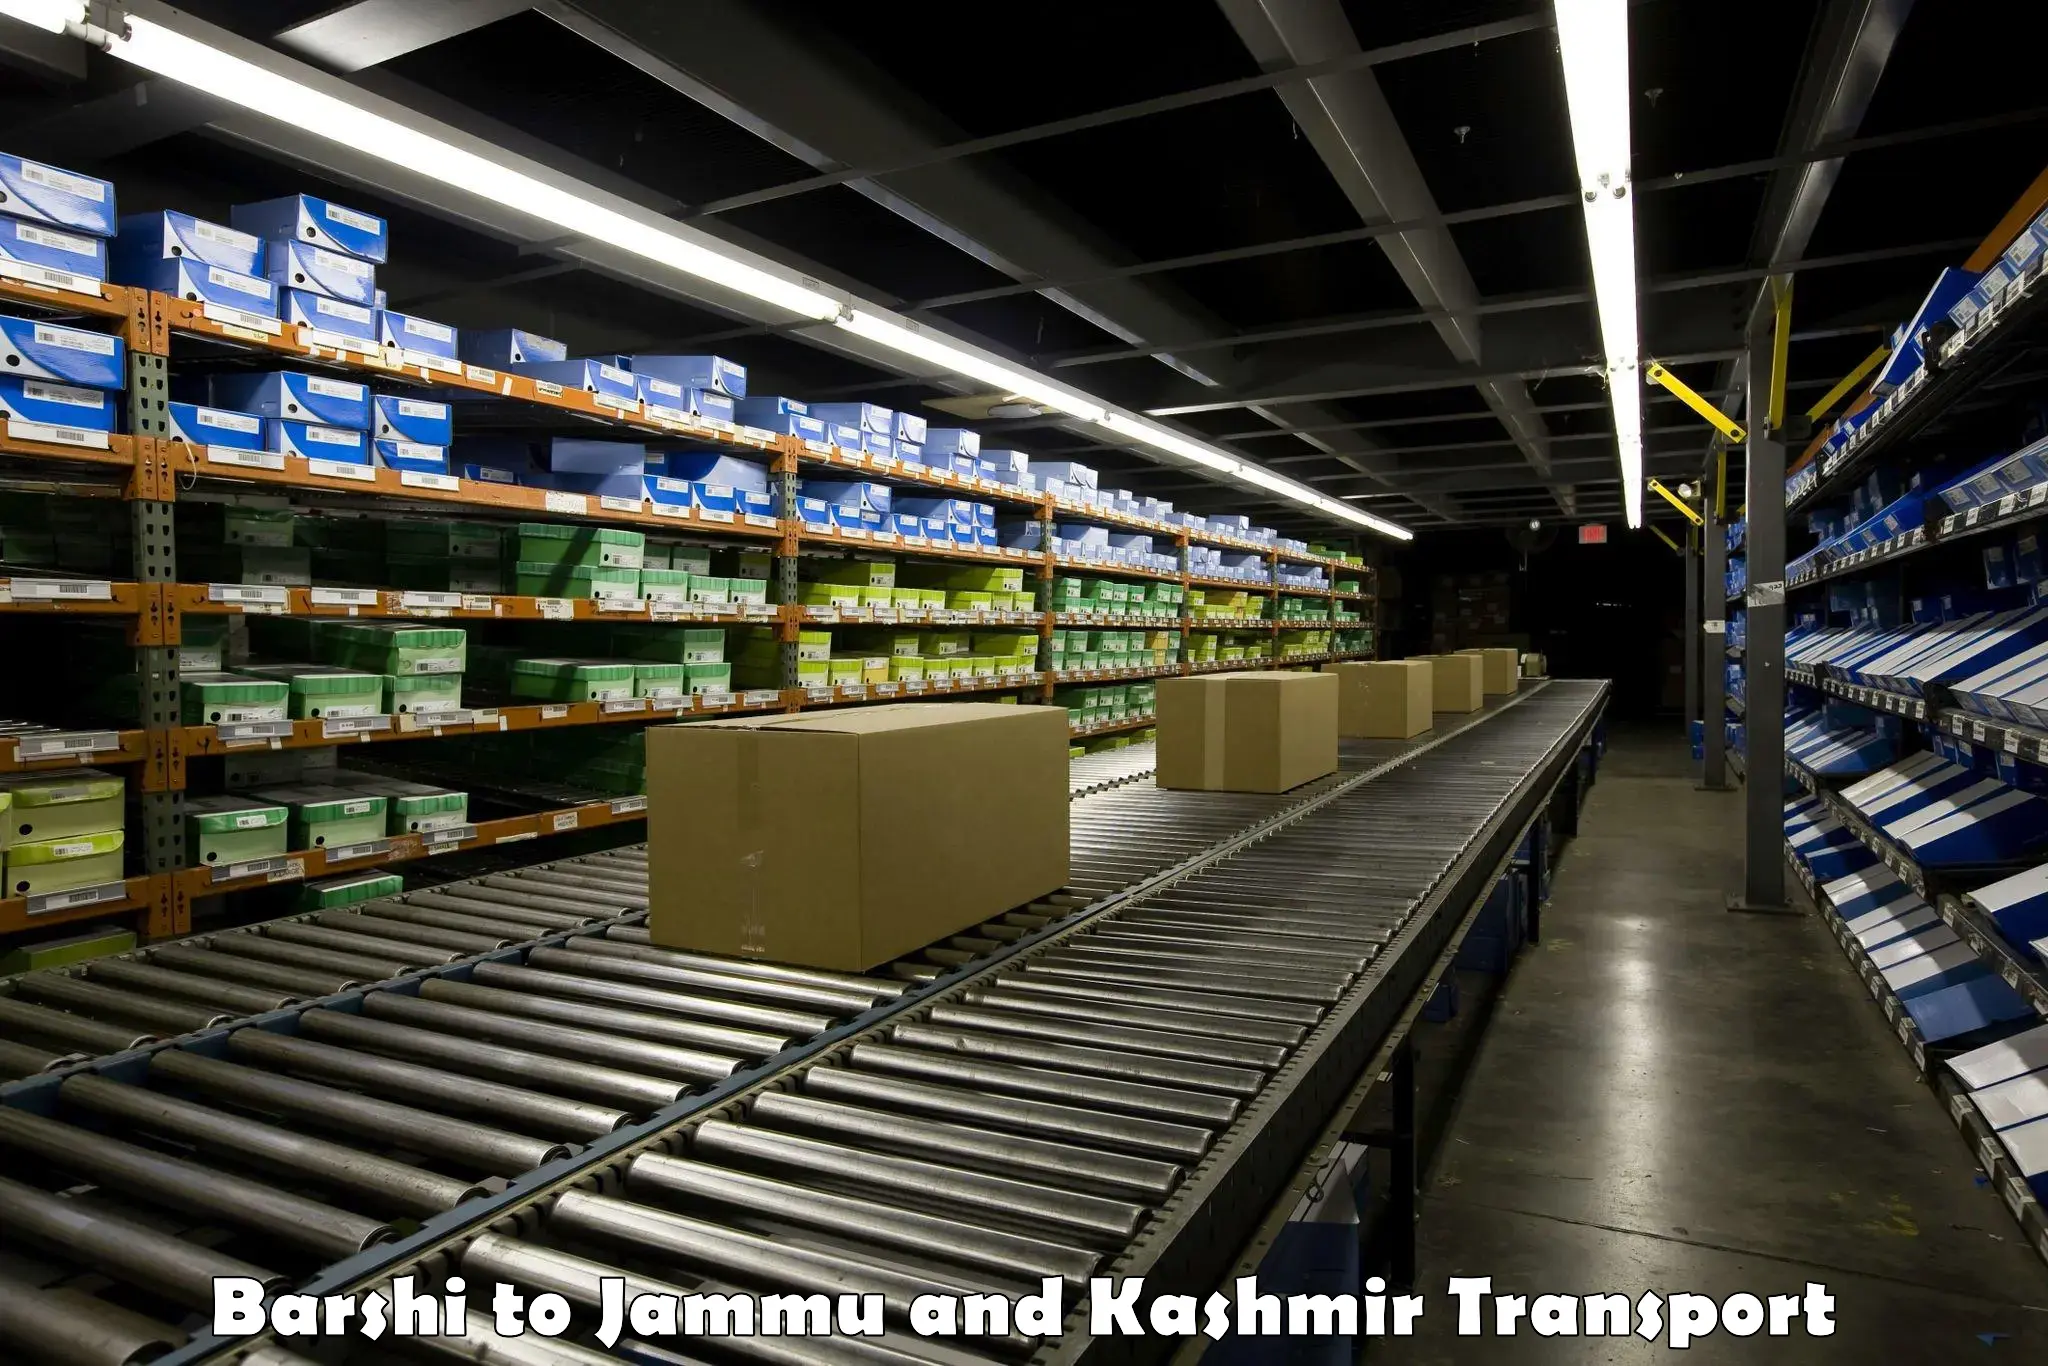 Truck transport companies in India Barshi to Anantnag